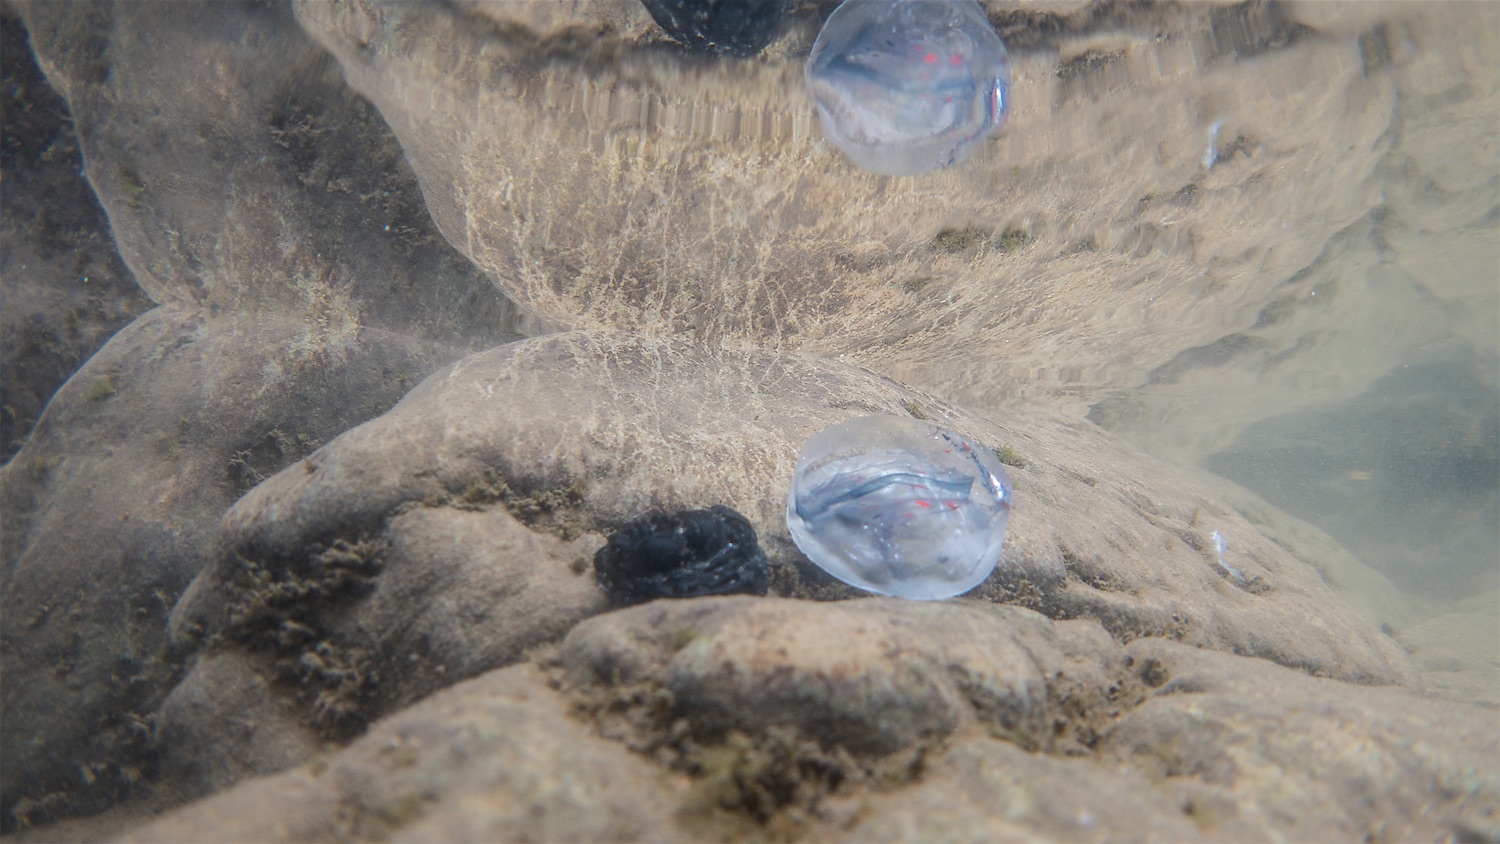 A landscape underwater photograph with sandy yellows and murky greens and browns. As well as rock formations and a reflective underwater skin surface, in this image we can see two separate round disks. One black and one between being cloudy and transparent. In other there are faces. However in the black small glass disk – the size of a 50p piece, the face is producing out. In the cloudy transparent disk, the face is within the piece, hollowed out from within.
Both these disks are hand made from glass and belong to a body of work the artist, Estabrak, is exploring using backgammon as a tool of engagement. These pieces are backgammon pieces made by the artist of her own head.